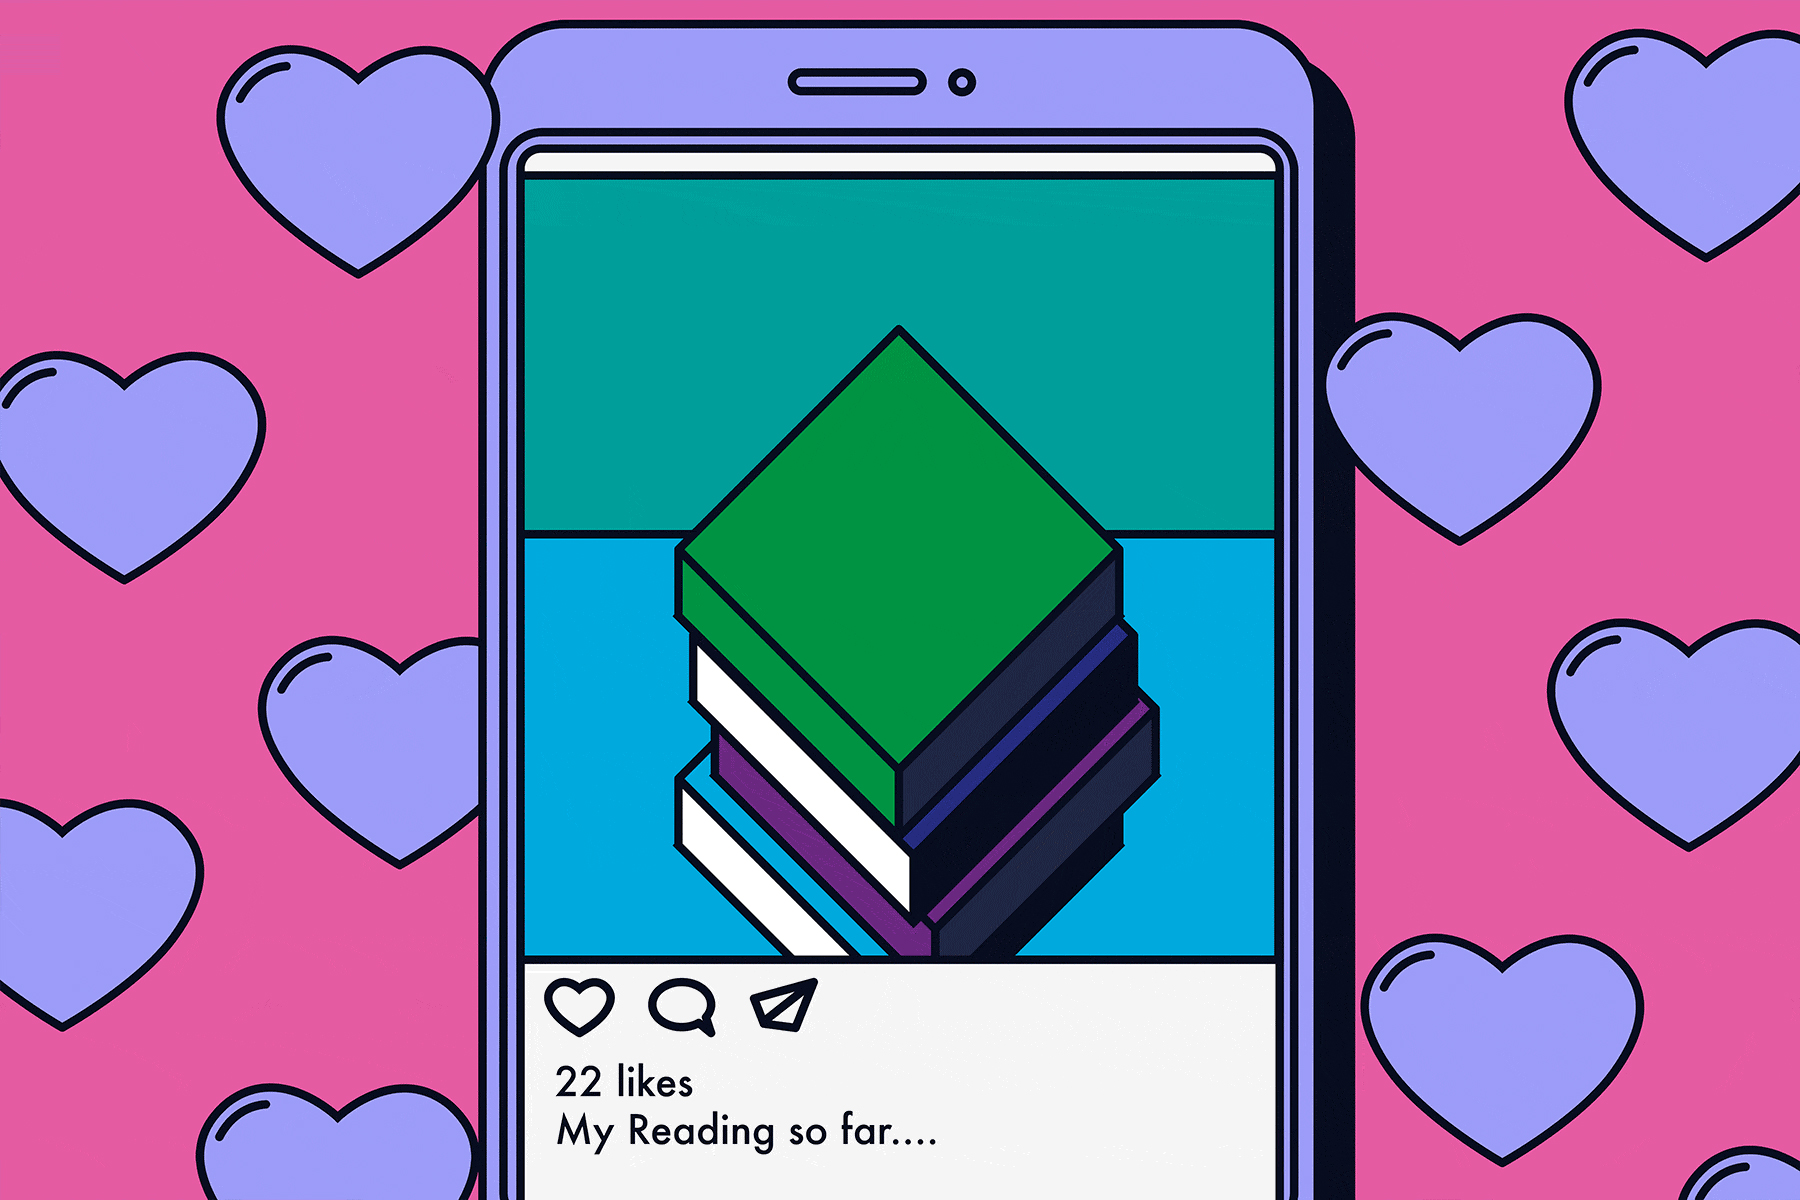 Image of a phone with books on the screen and hearts in the background